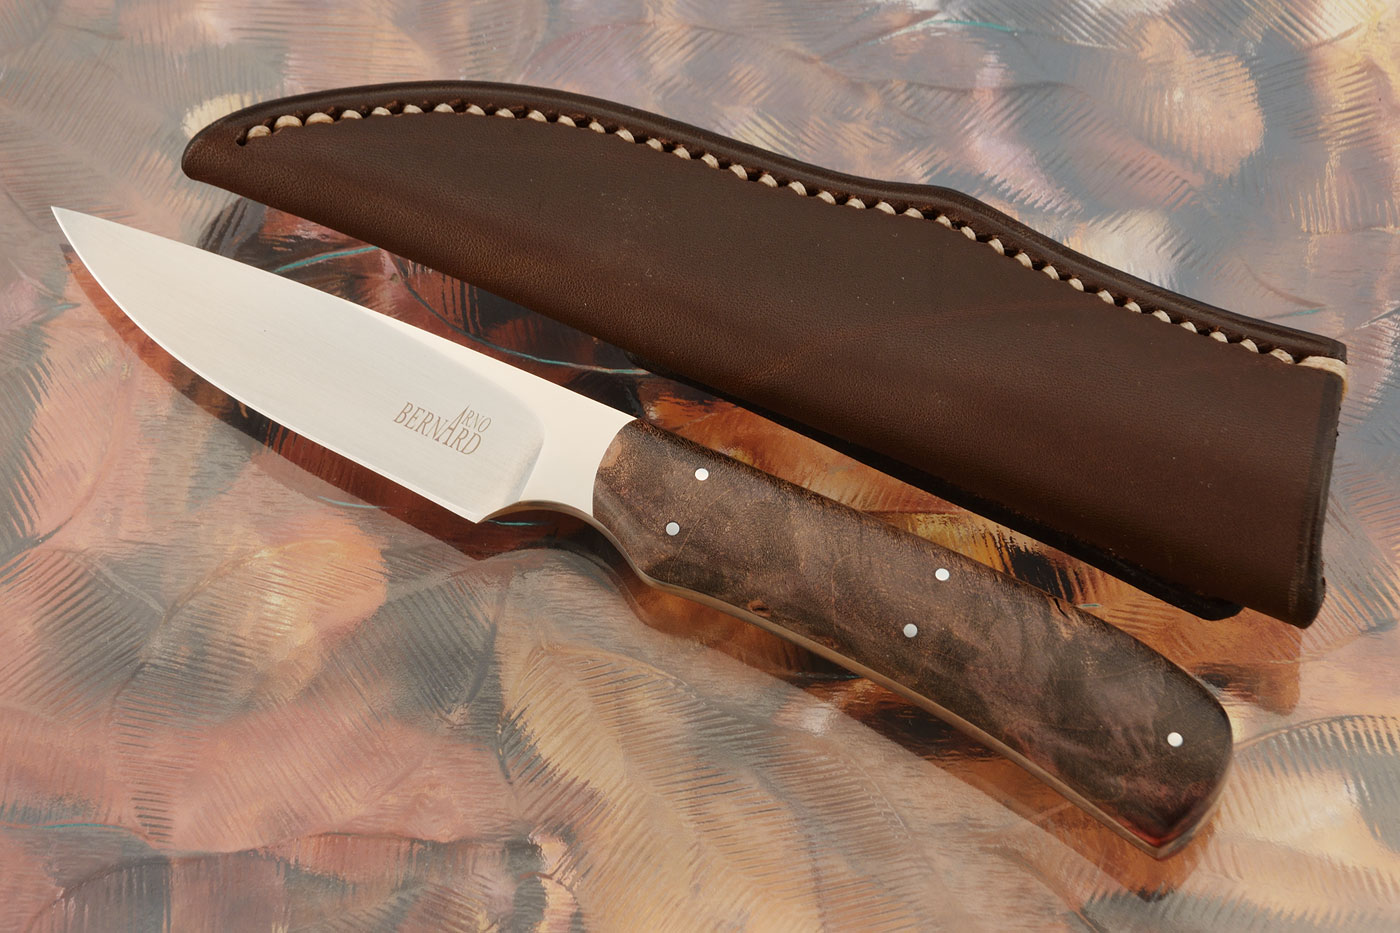 Utility/Hunter with Maple Burl - S-35VN